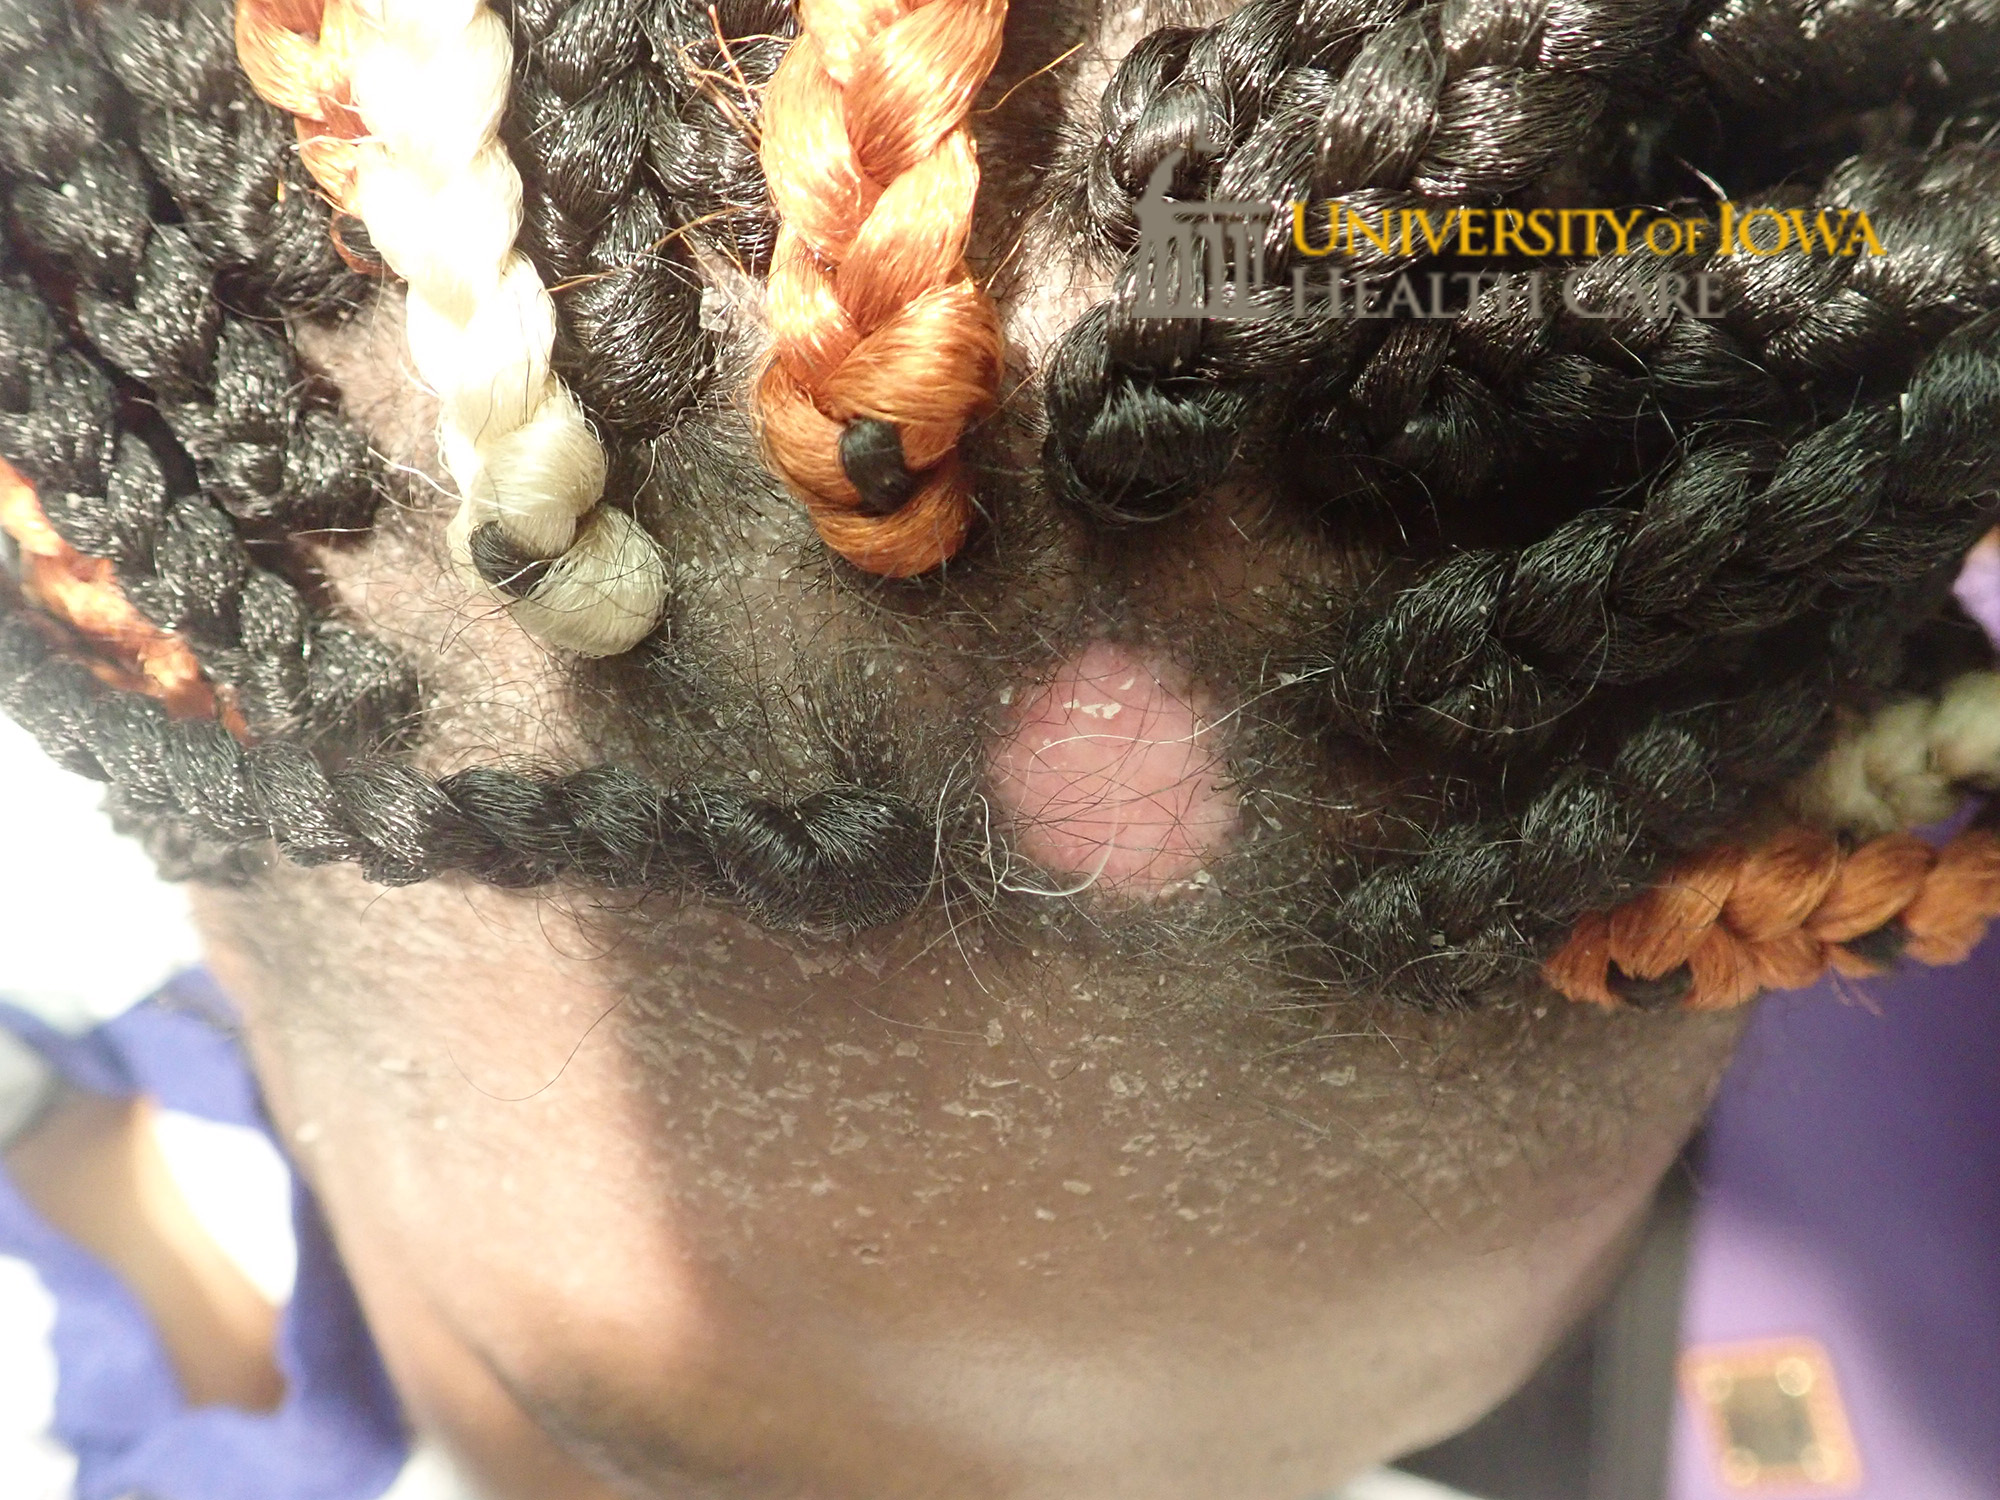 Well demaracated, shiny, and atrophic plaque with depigmentation and with rim of hyperpigmentation and surrounding scaling on the frontal scalp. (click images for higher resolution).